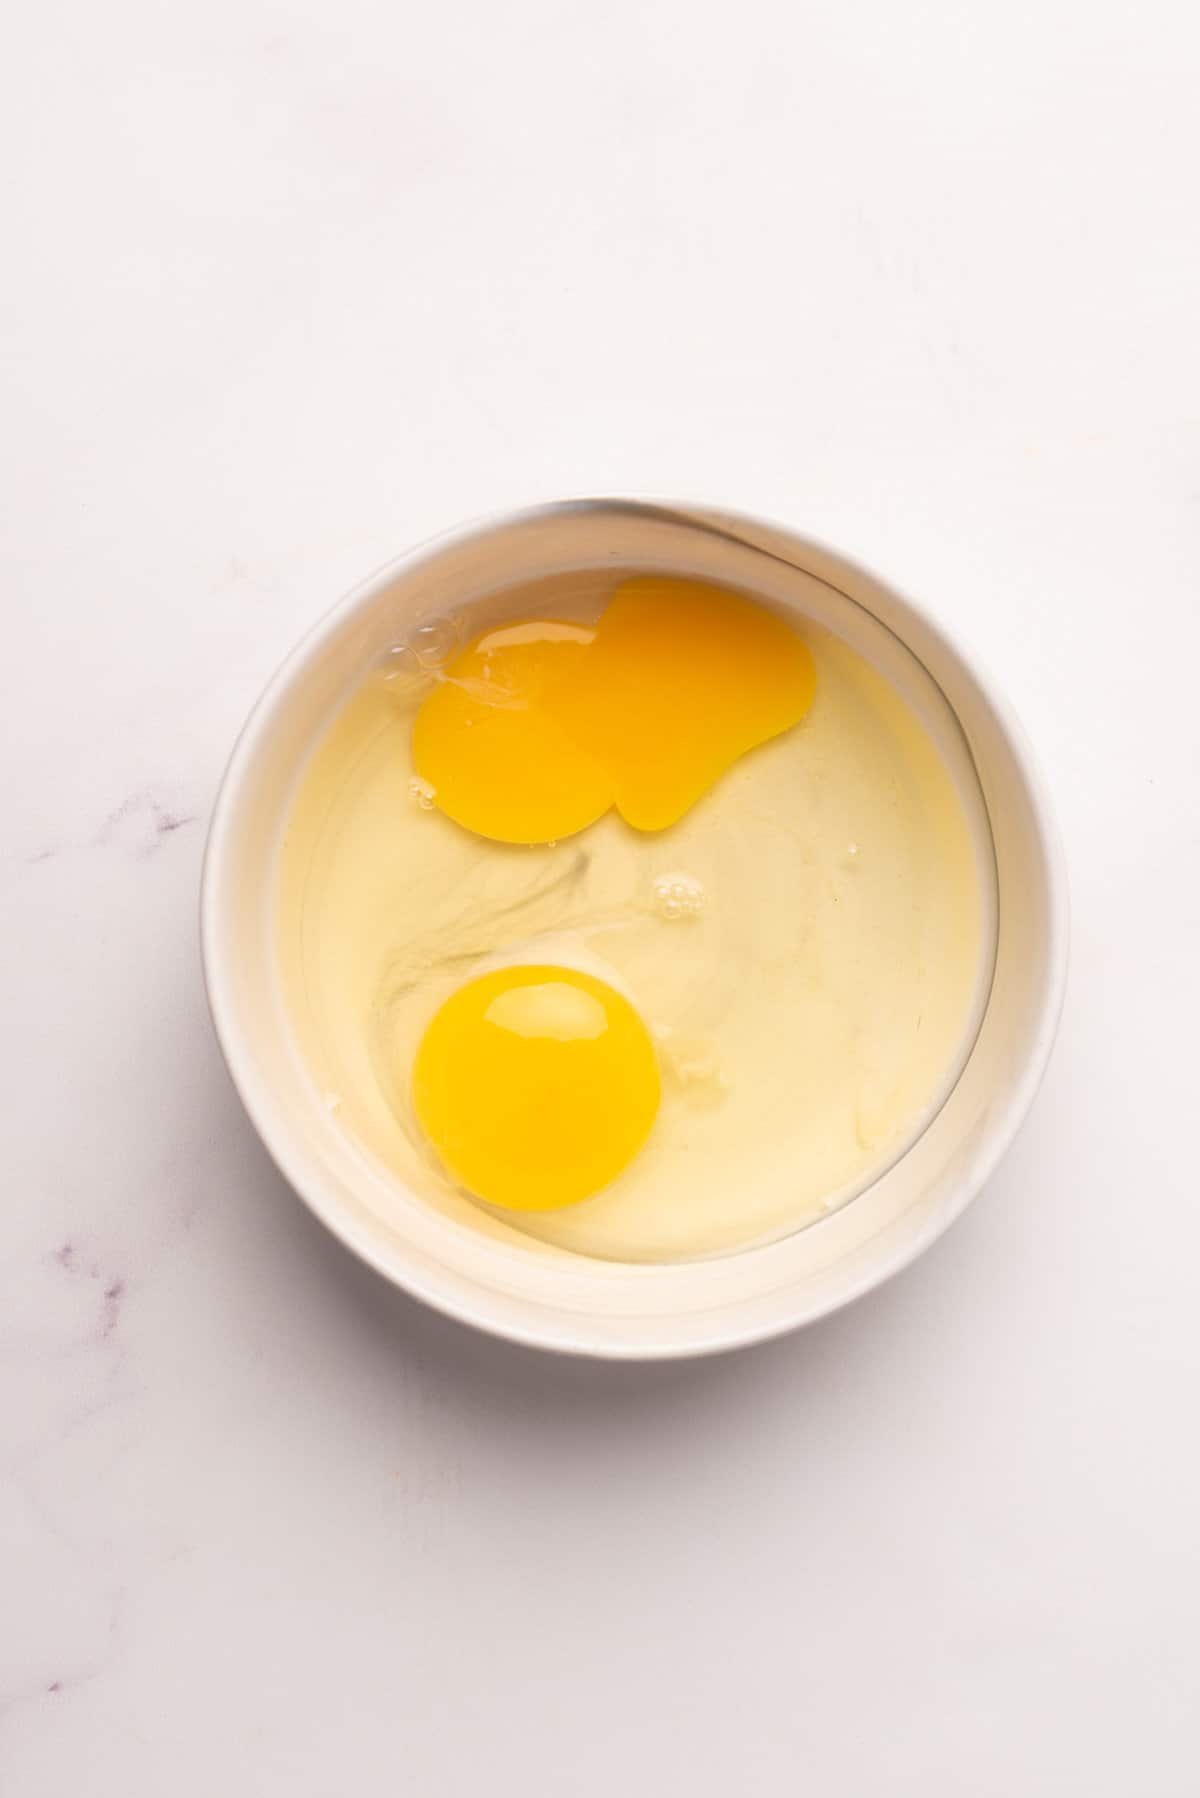 An overhead image of two uncooked eggs in a ramekin.